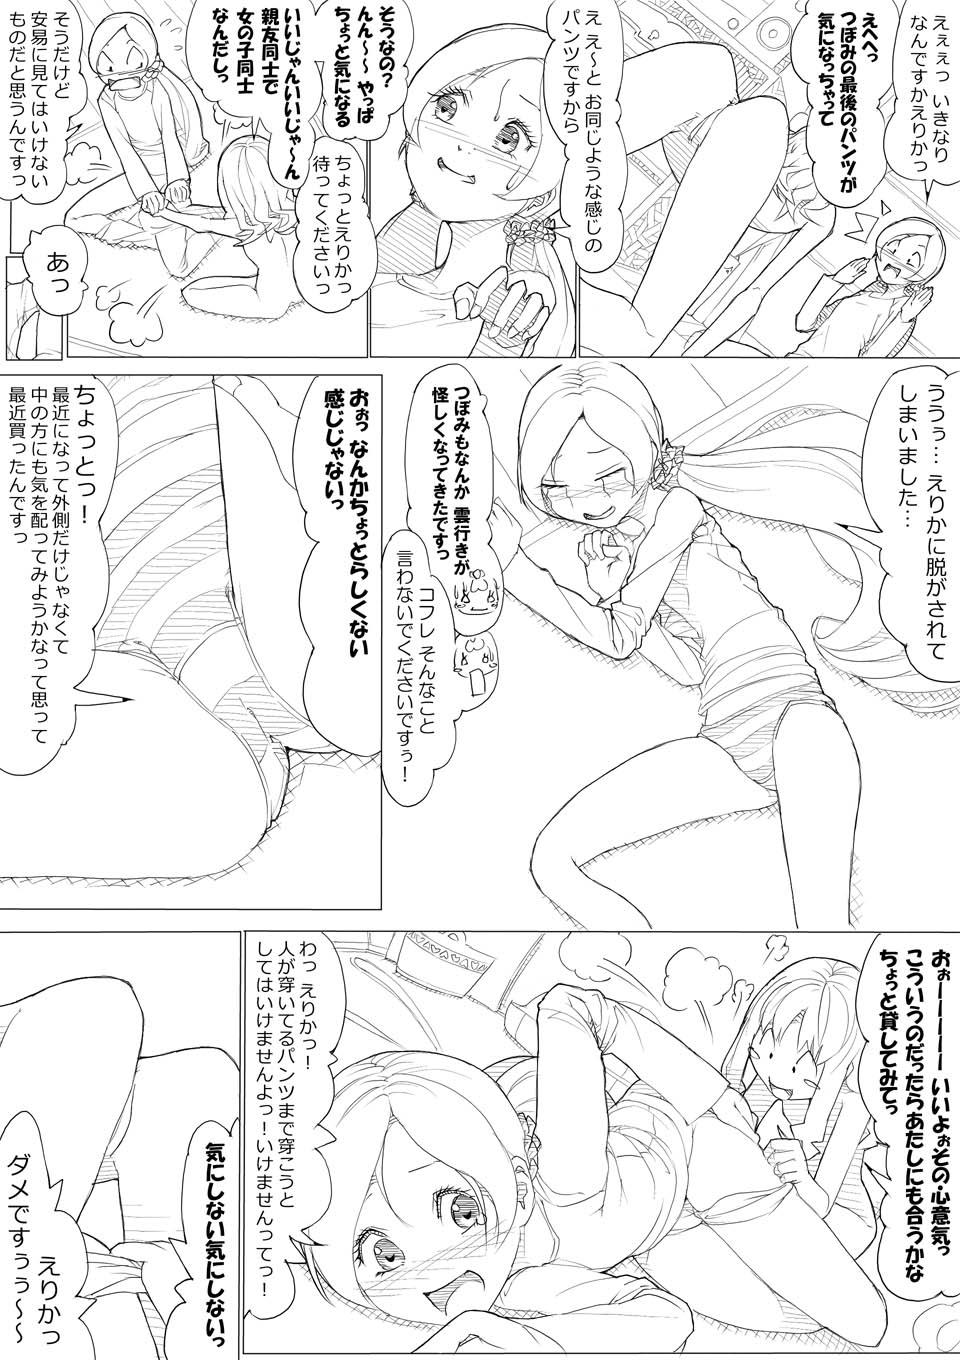 Thong ハトプリ - Heartcatch precure Cdzinha - Page 11